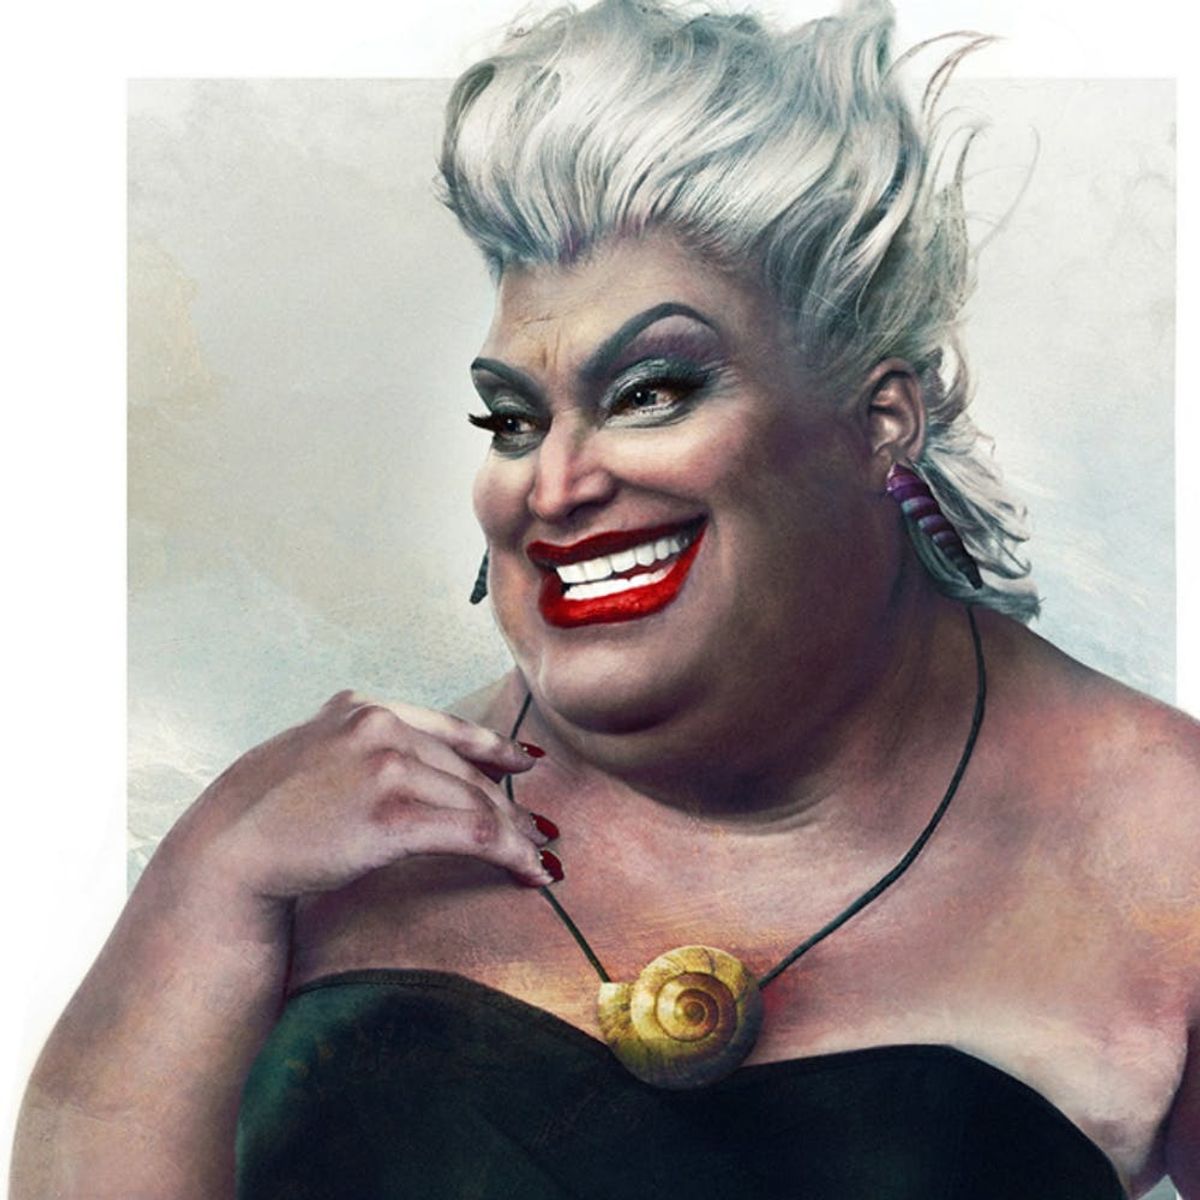 These Creepy Illustrations Show What Disney Villains Would Look like IRL